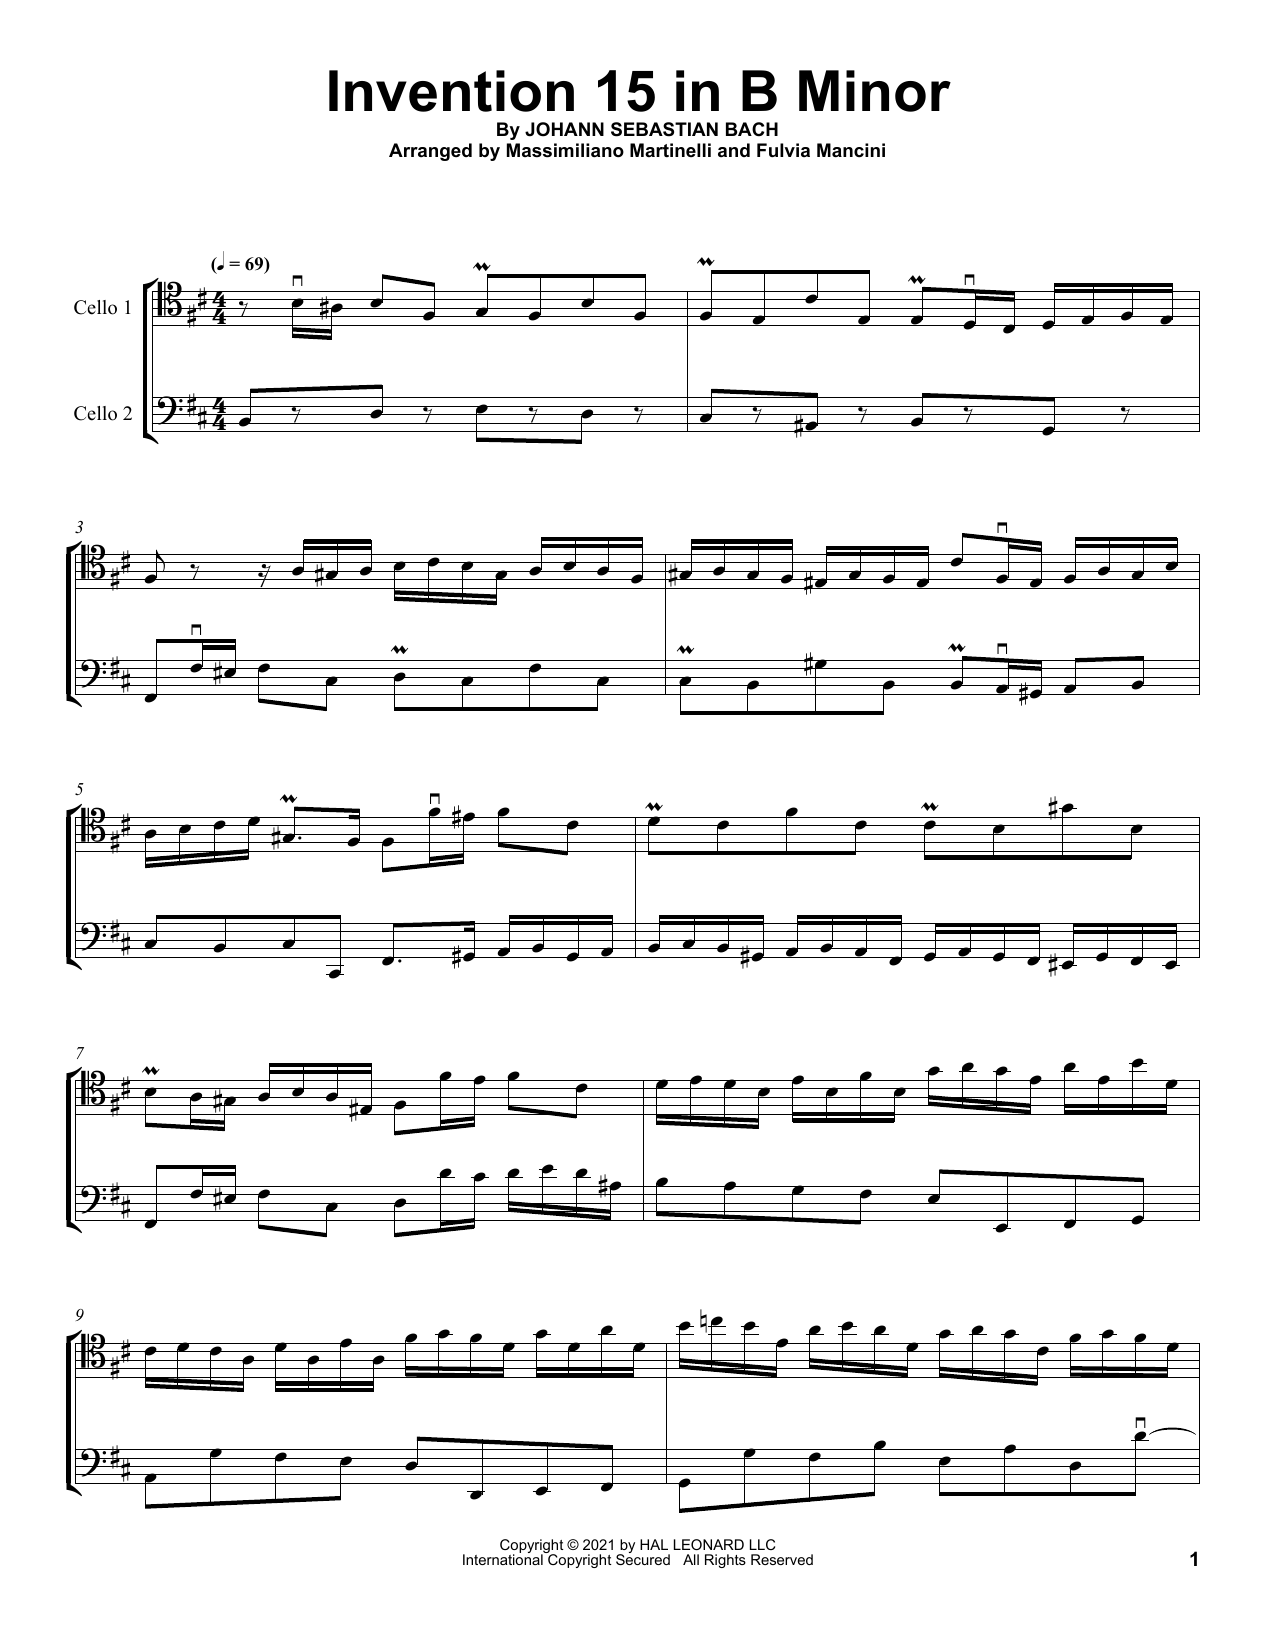 Download Mr & Mrs Cello Invention 15 In B Minor Sheet Music